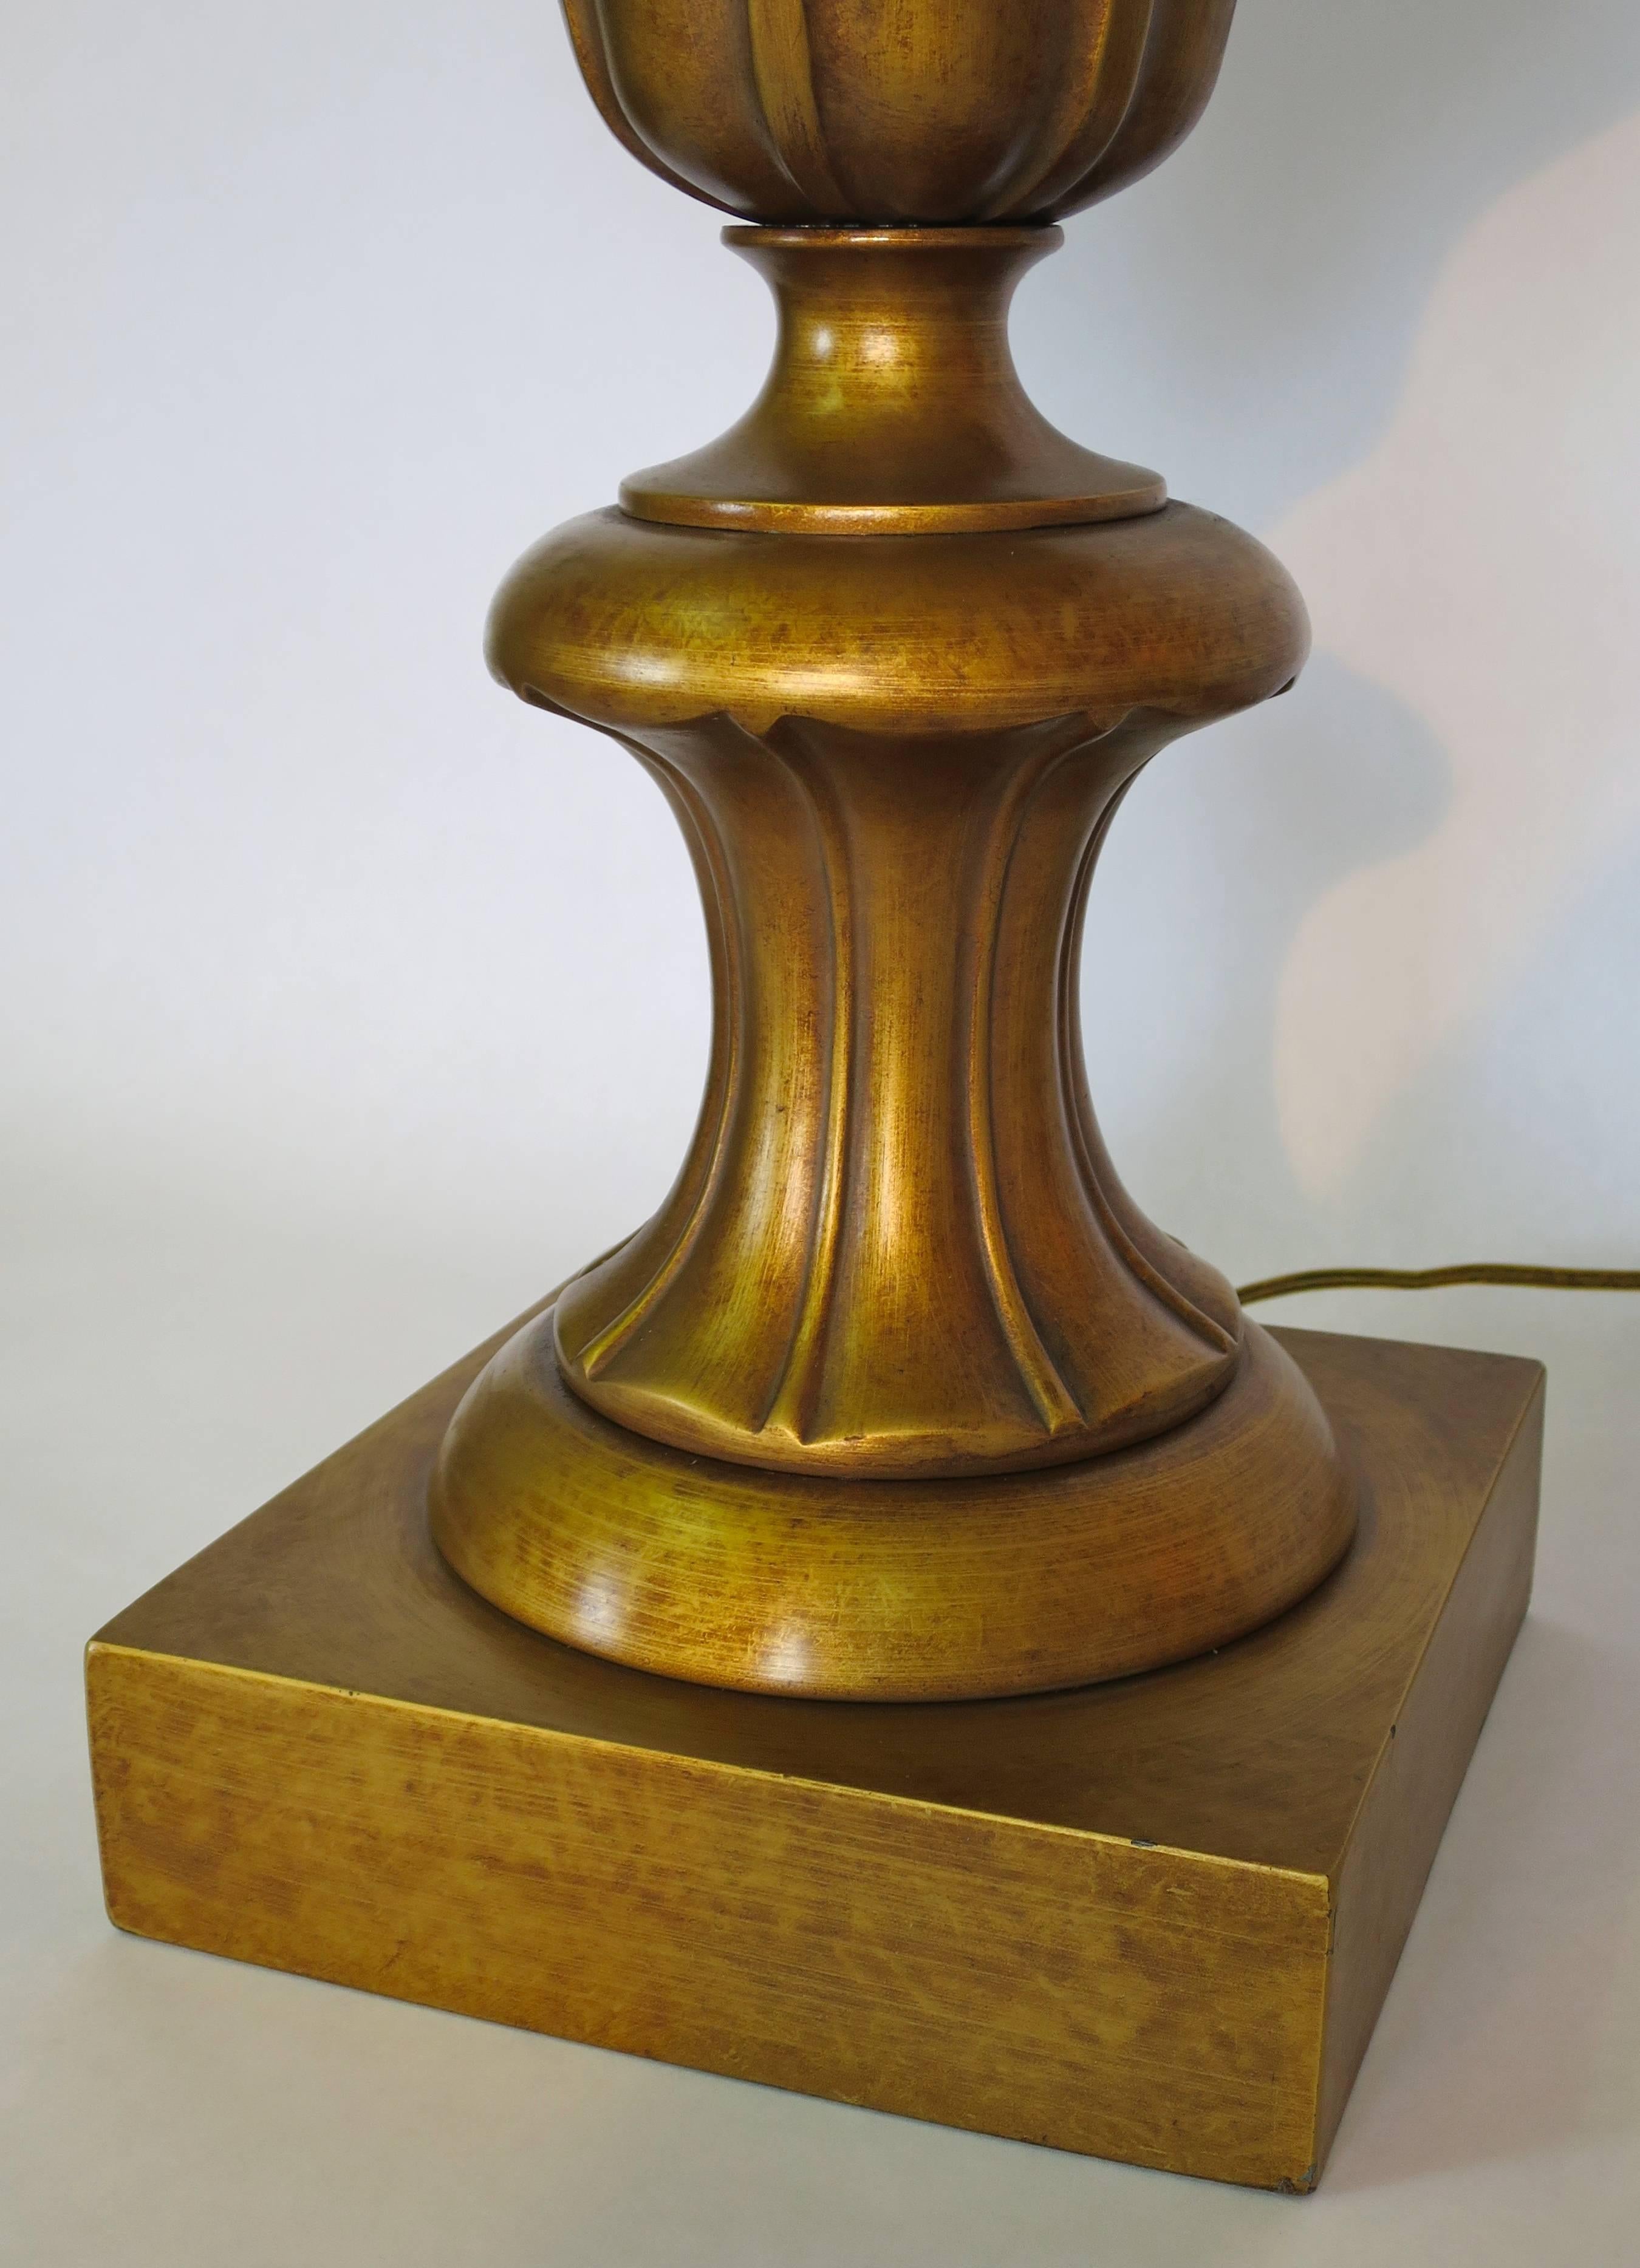 Rembrandt Brass Table Lamp In Excellent Condition For Sale In San Diego, CA